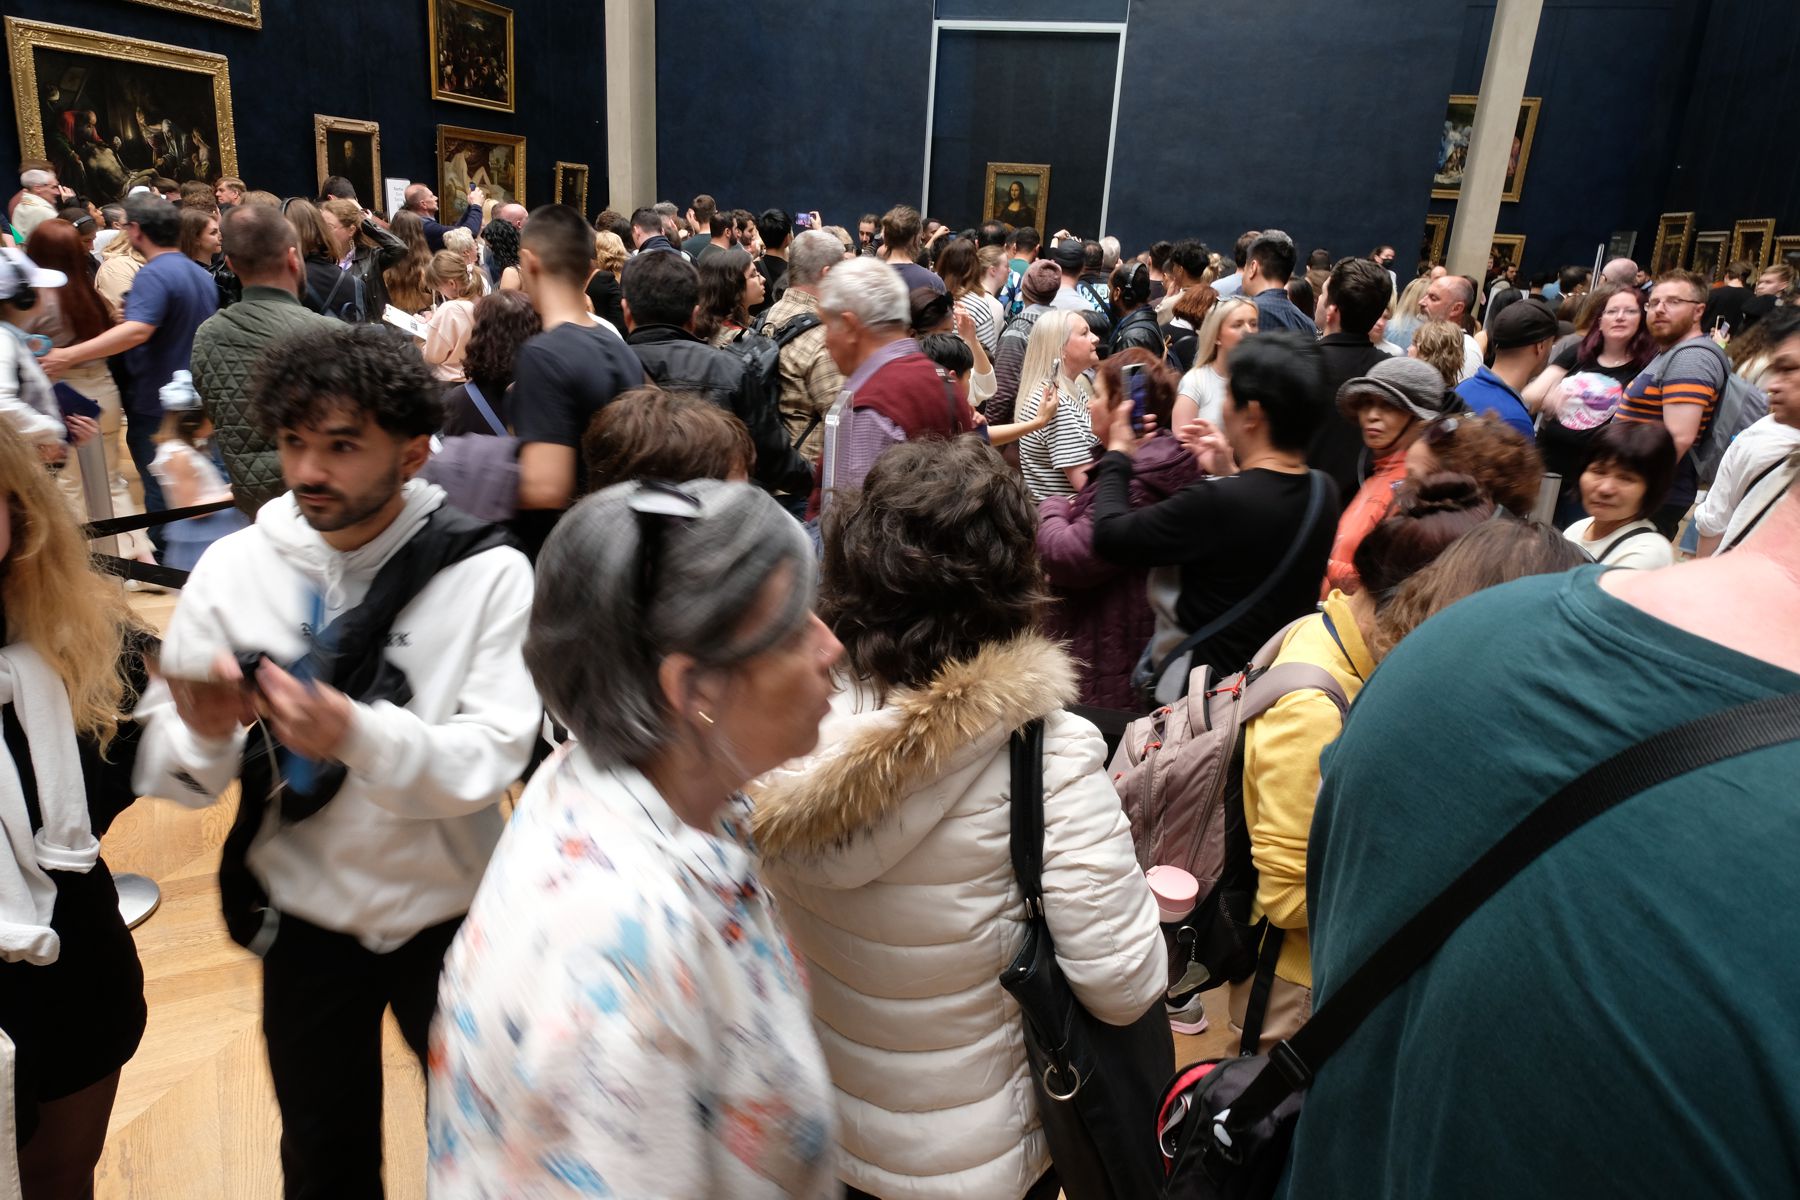 Crowd trying to get close enough to Mona Lisa for a selfie.